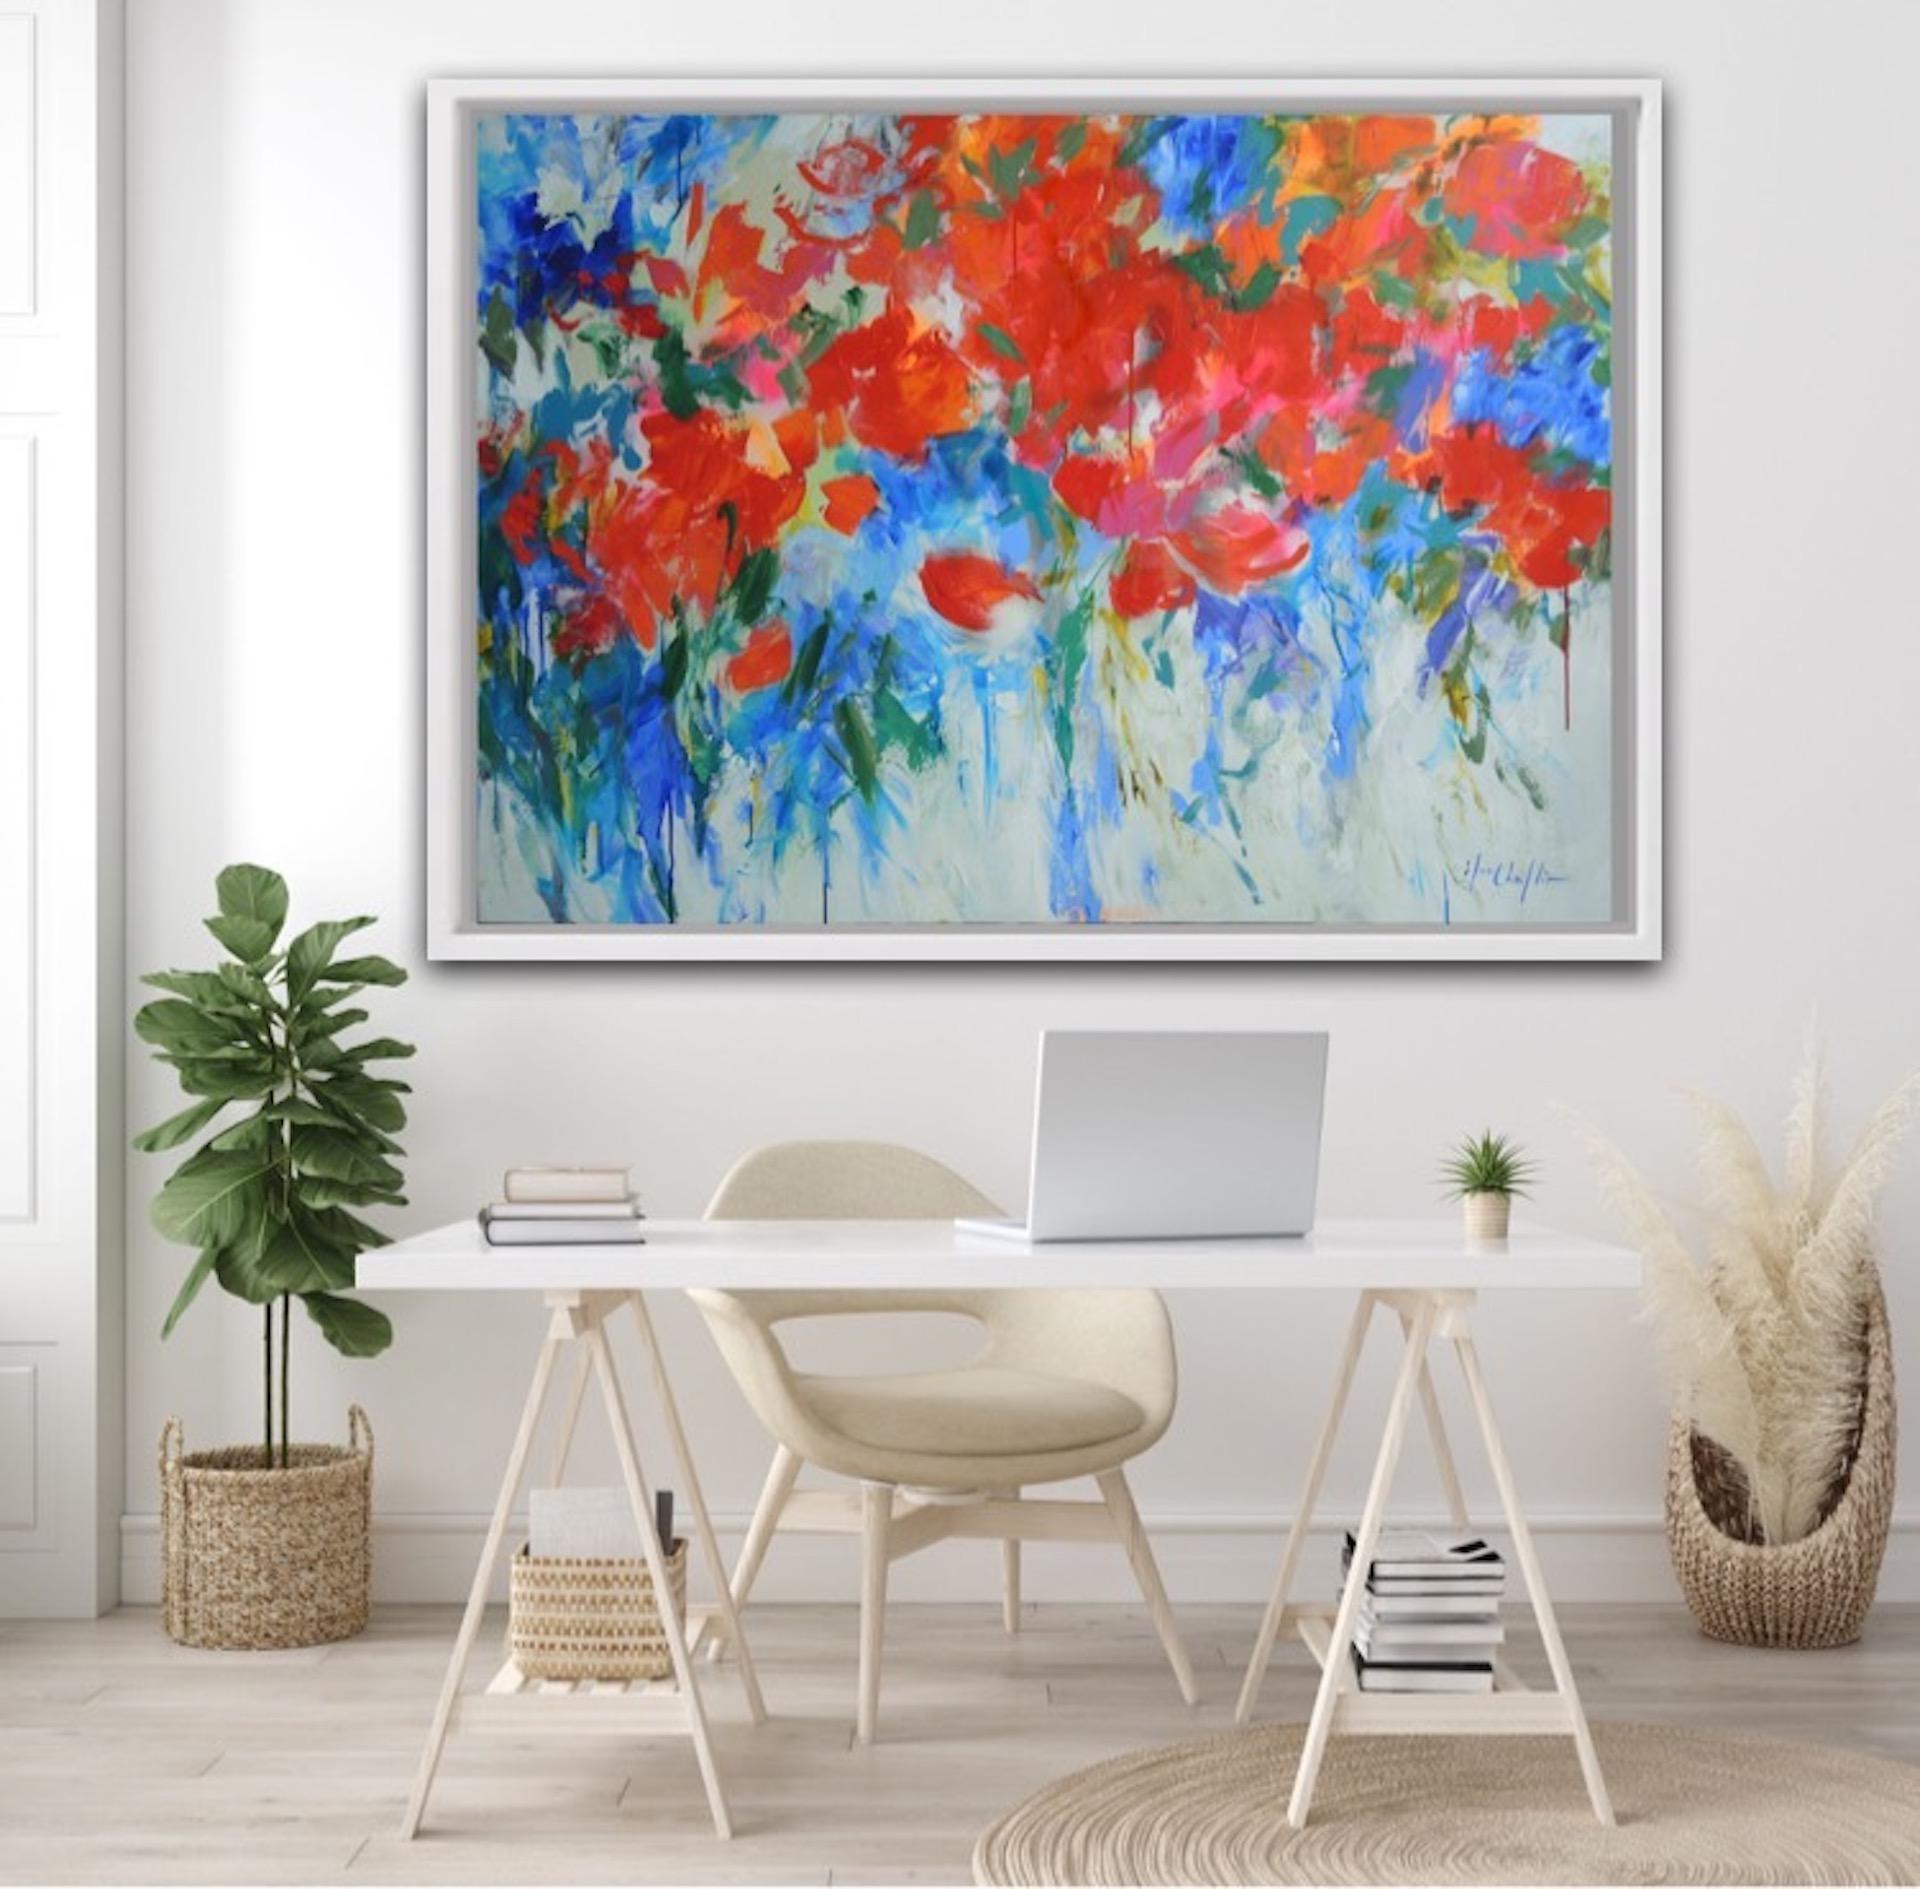 Mary Chaplin, Summer Escape, Original Statement Abstract Impressionist Painting